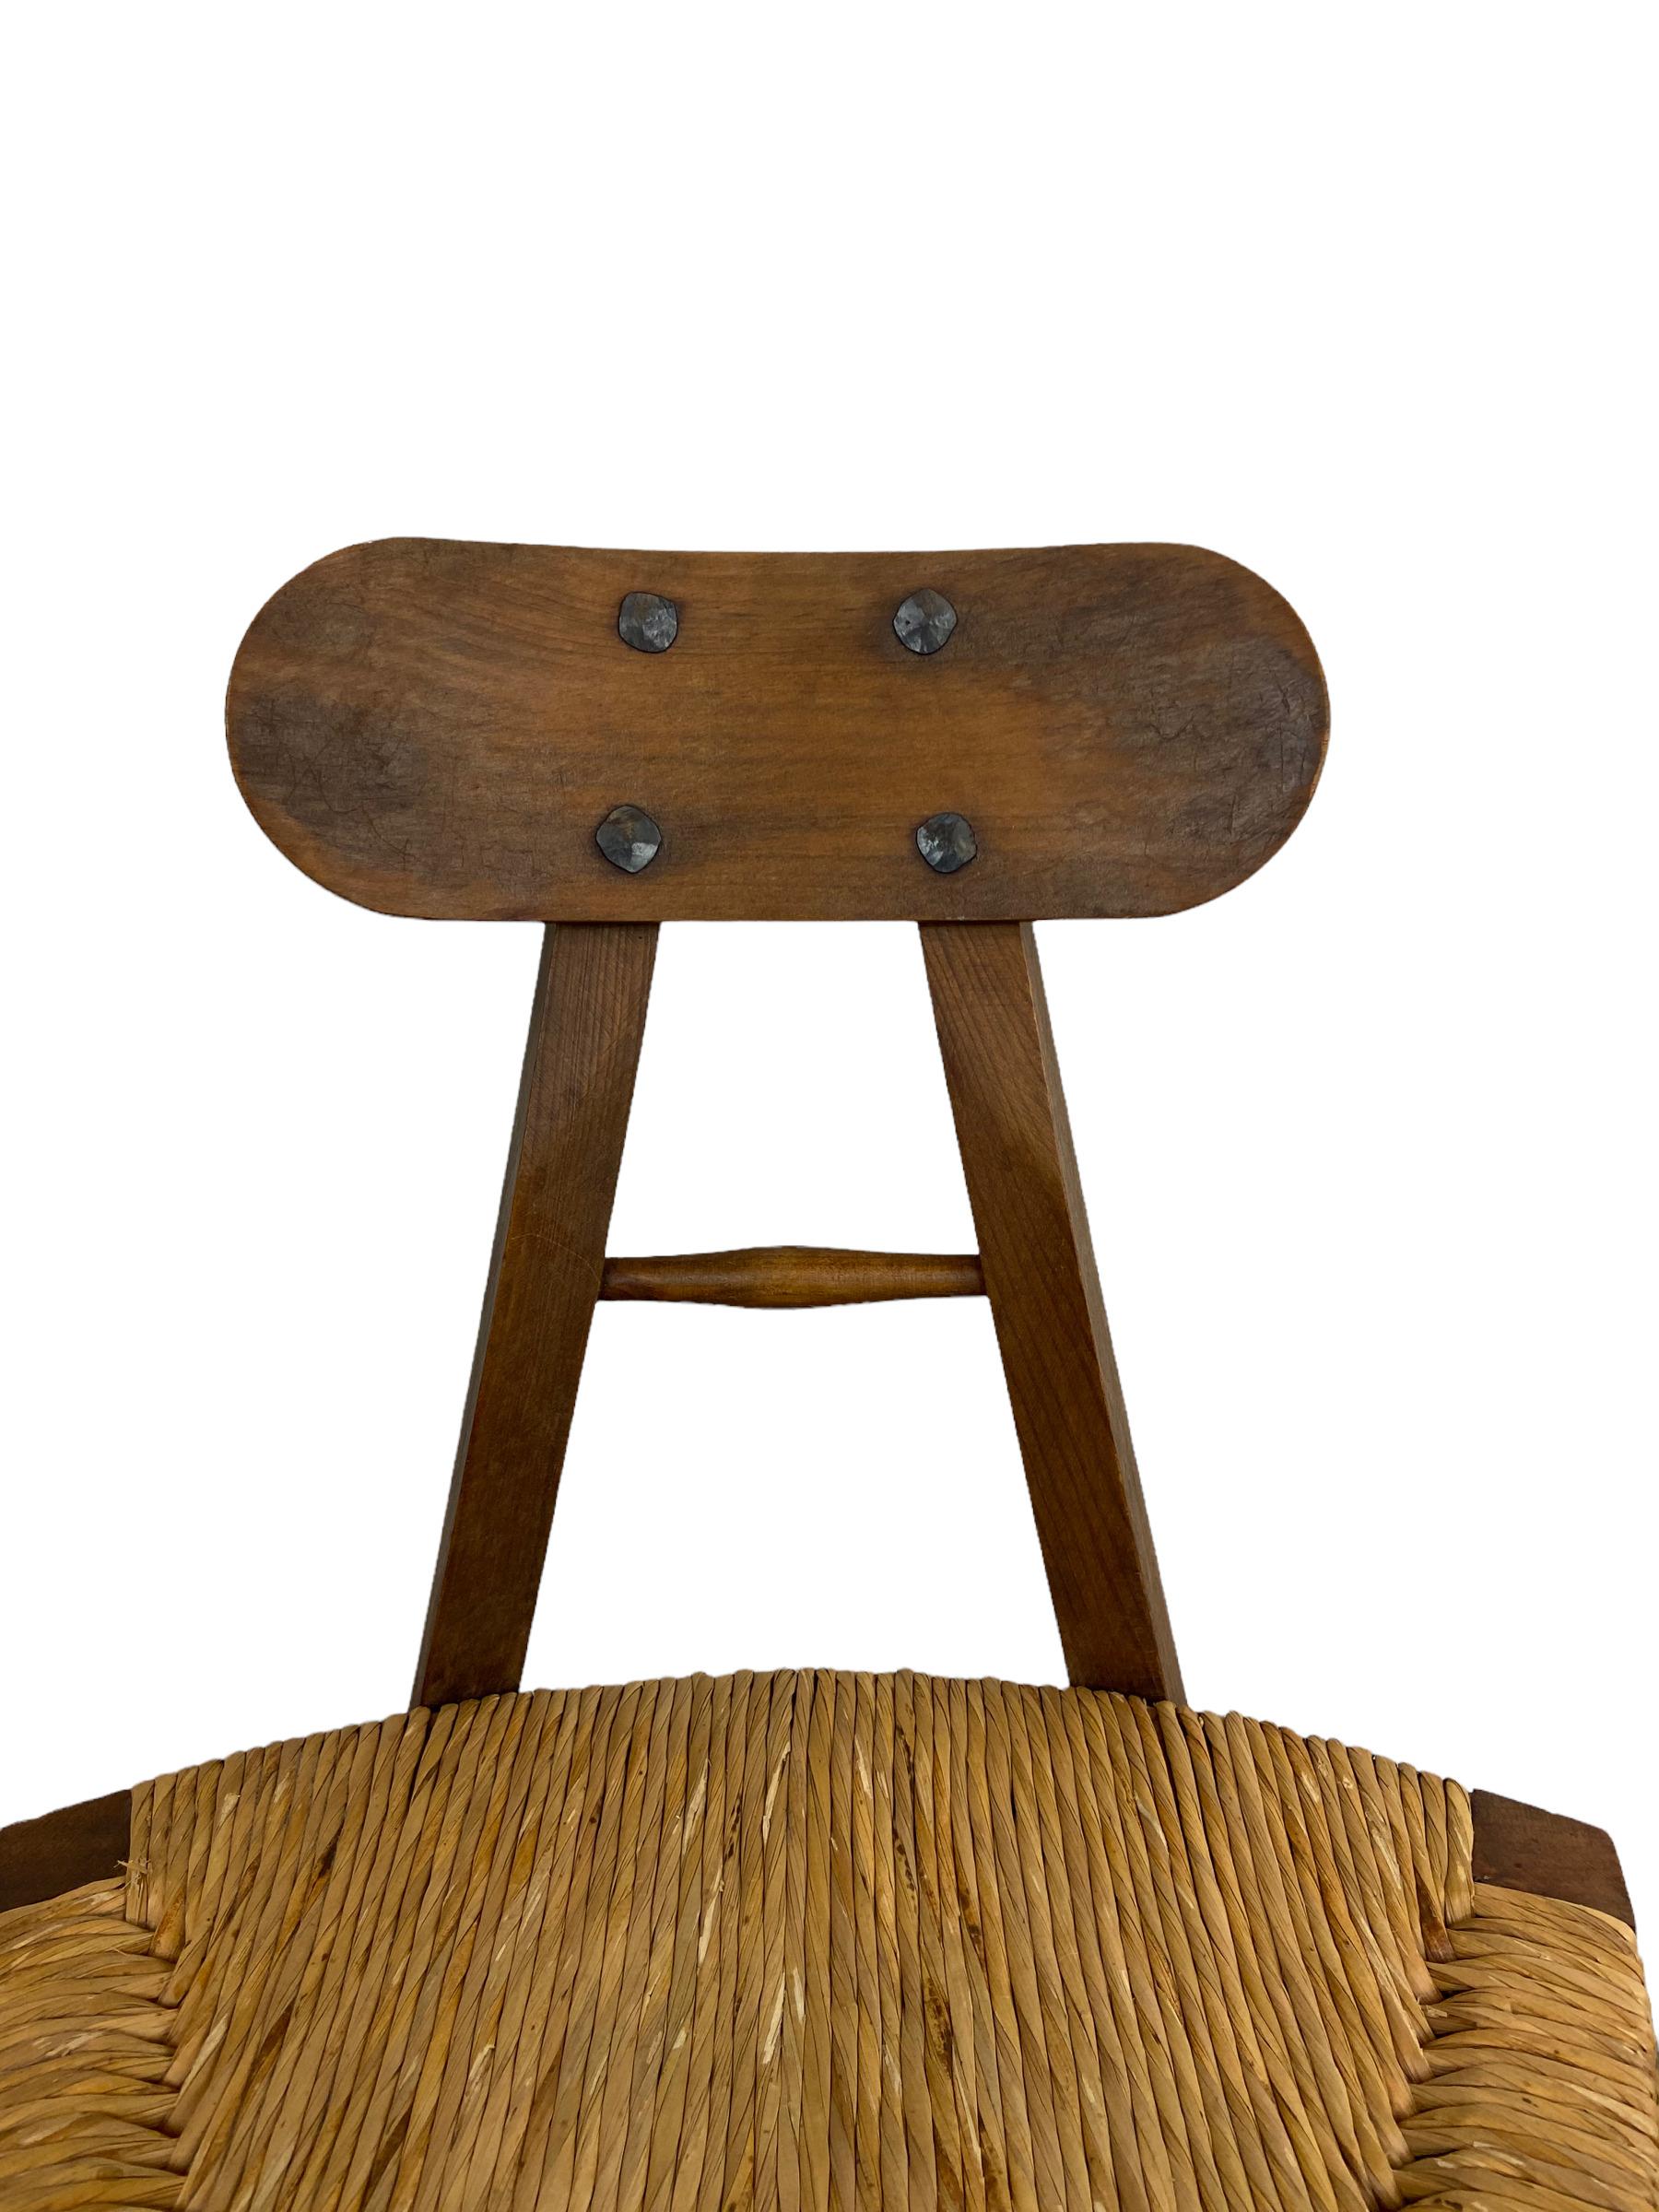 Very rare tripod chair made of beechwood with a rush seat. French design from the fifties. This vintage object is in a good condition but it shows sign of age.